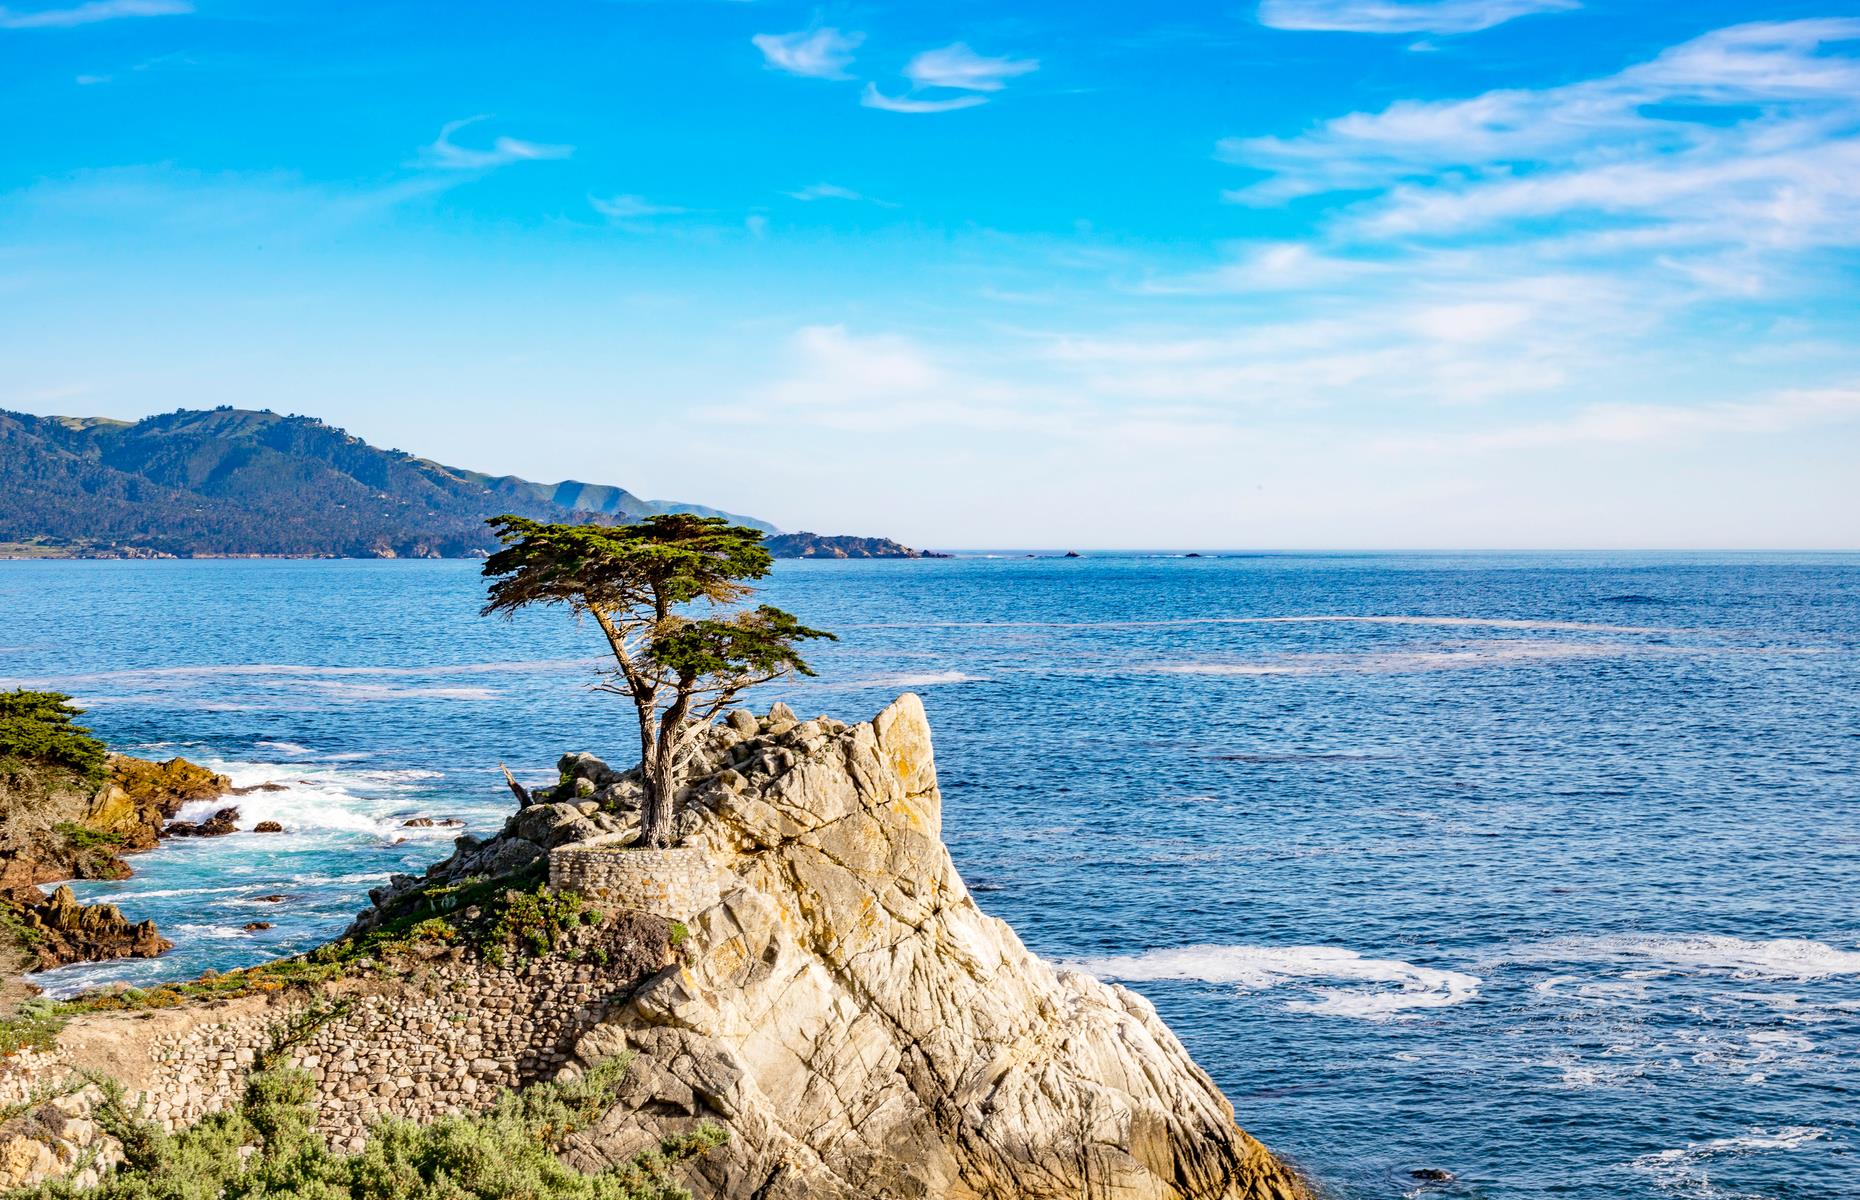 <p>Think of this as a road trip within a road trip. A short detour from the Pacific Coast Highway or Highway 1, <a href="https://www.pebblebeach.com/17-mile-drive/">the route</a> loops past pebble and sand beaches, skimming low by the ocean and through pine forest. It costs $10.50 per vehicle to enter, but it’s worth it – if only to meet Lone Cypress (pictured), a solitary tree perched on a bluff, and to peek at harbor seal pups (from a distance) at Fanshell Beach.</p>